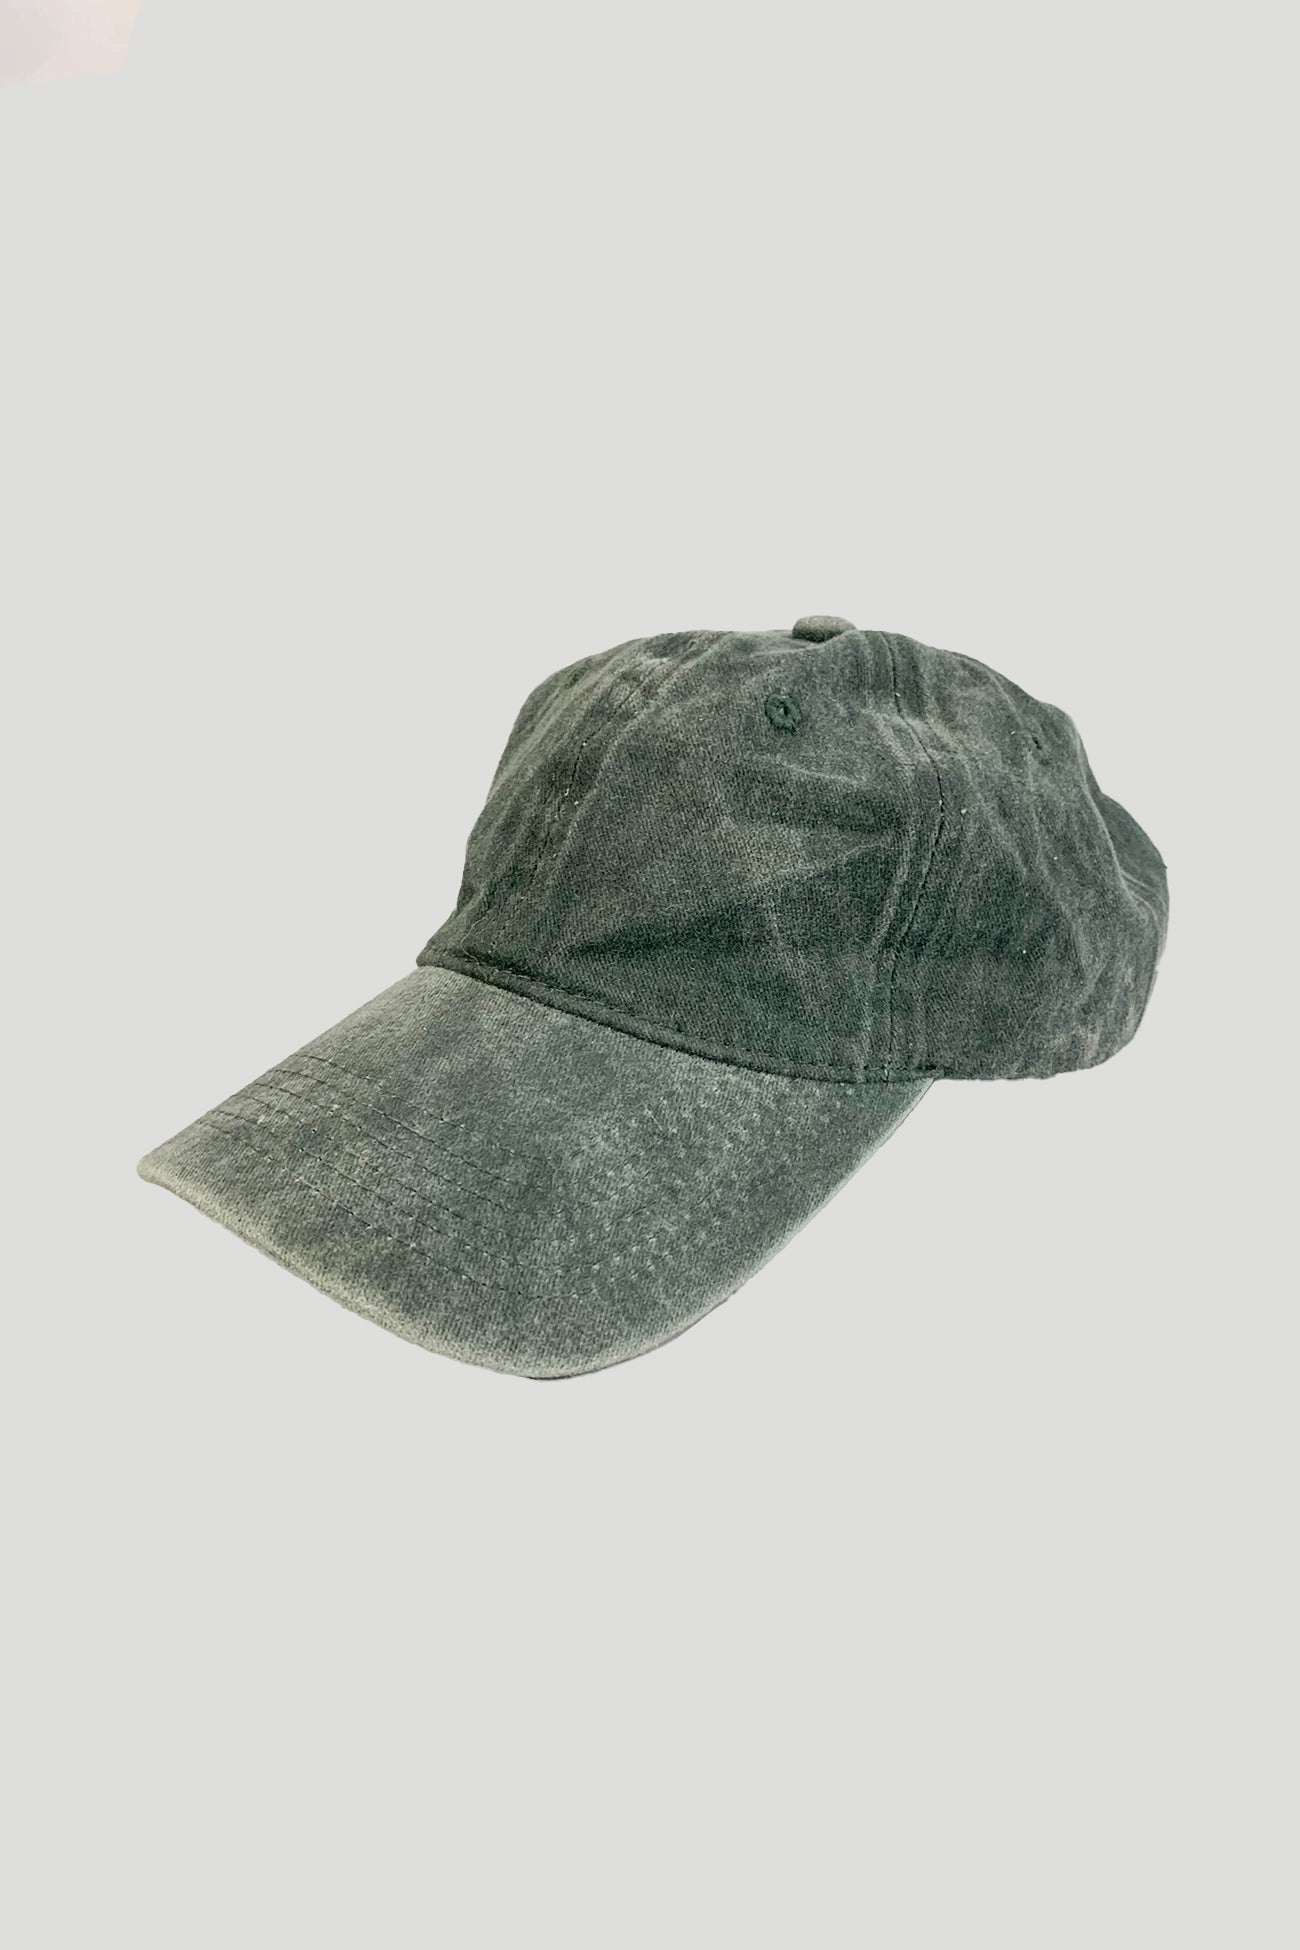 Pigment Dyed Baseball Hat in Olive Green